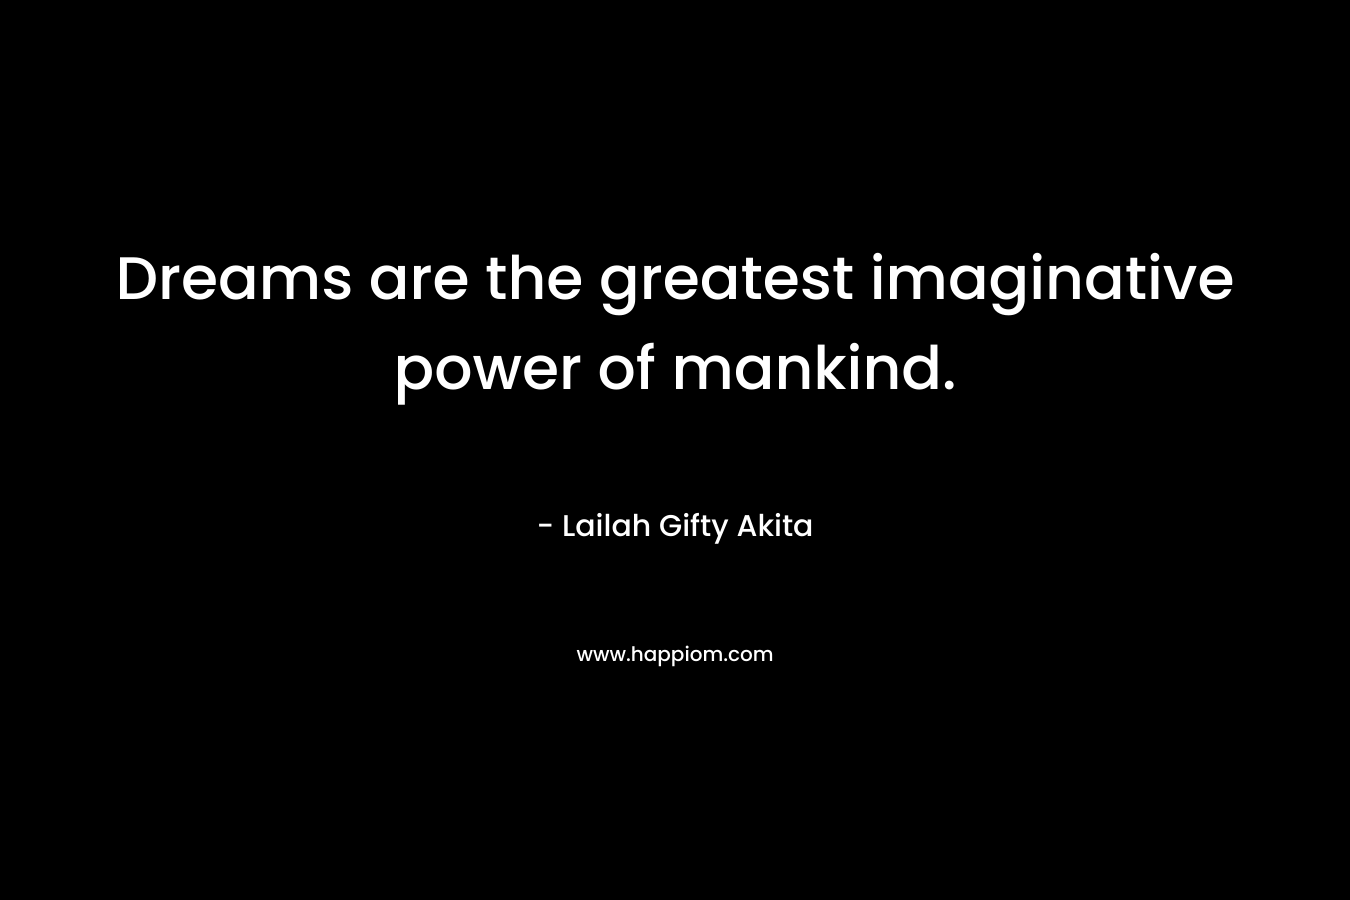 Dreams are the greatest imaginative power of mankind.